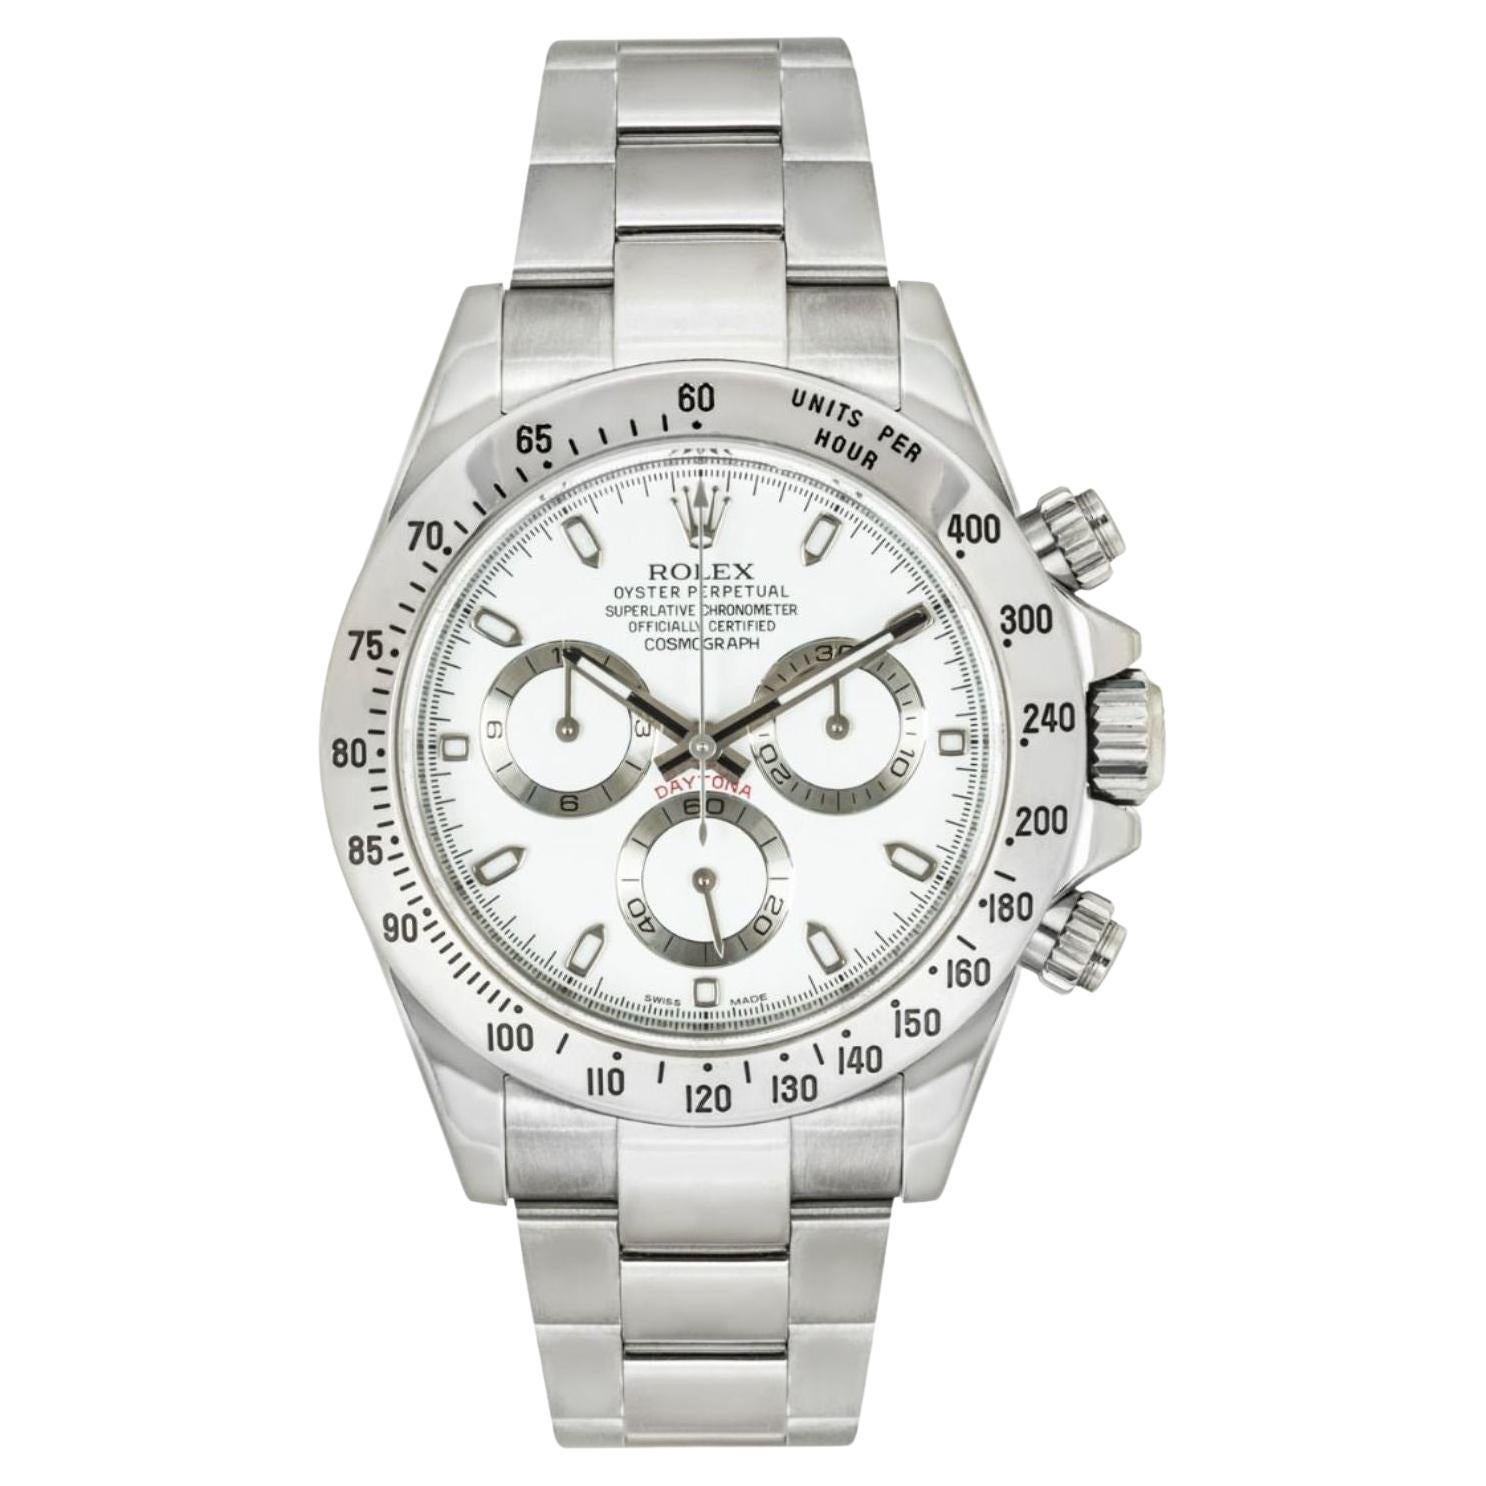 Rolex Daytona APH White Dial 116520 Watch For Sale